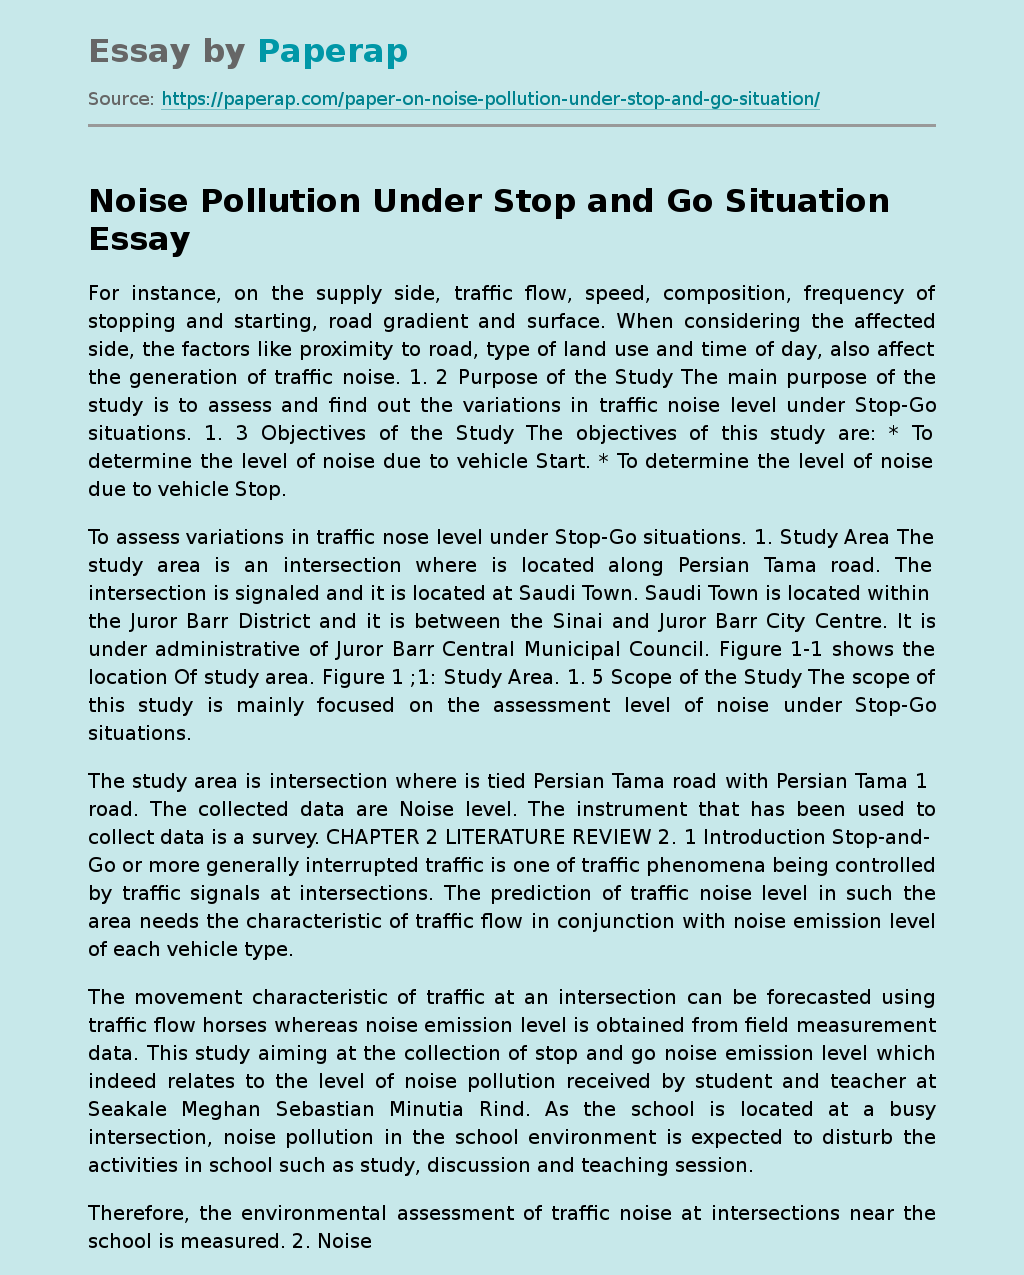 Noise Pollution Under Stop and Go Situation